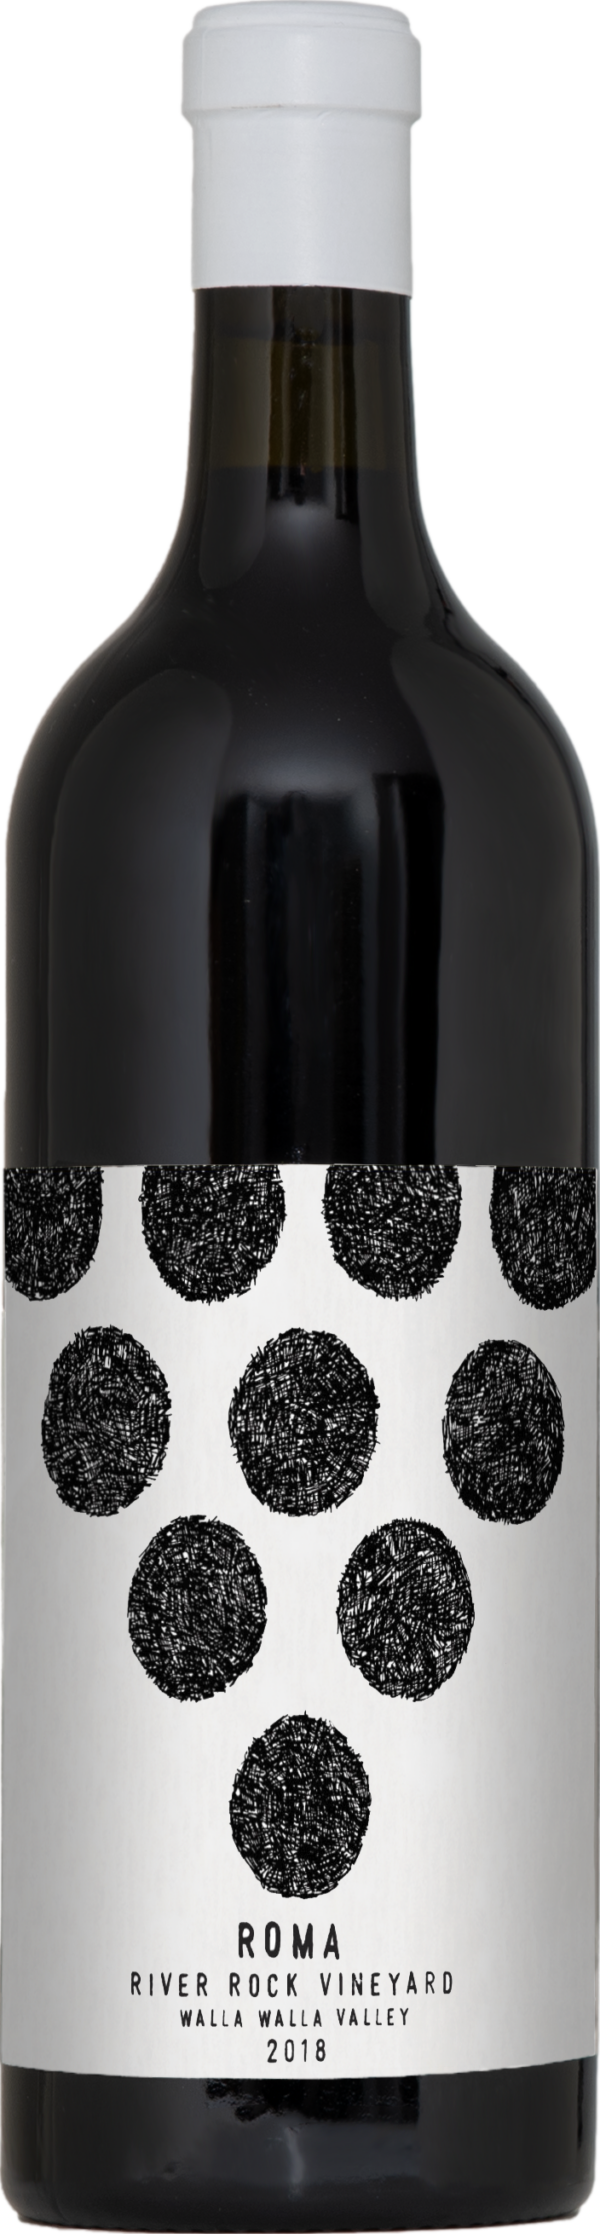 Product image of Charles Smith K Vintners Roma Cabernet - Syrah 2018 from 8wines